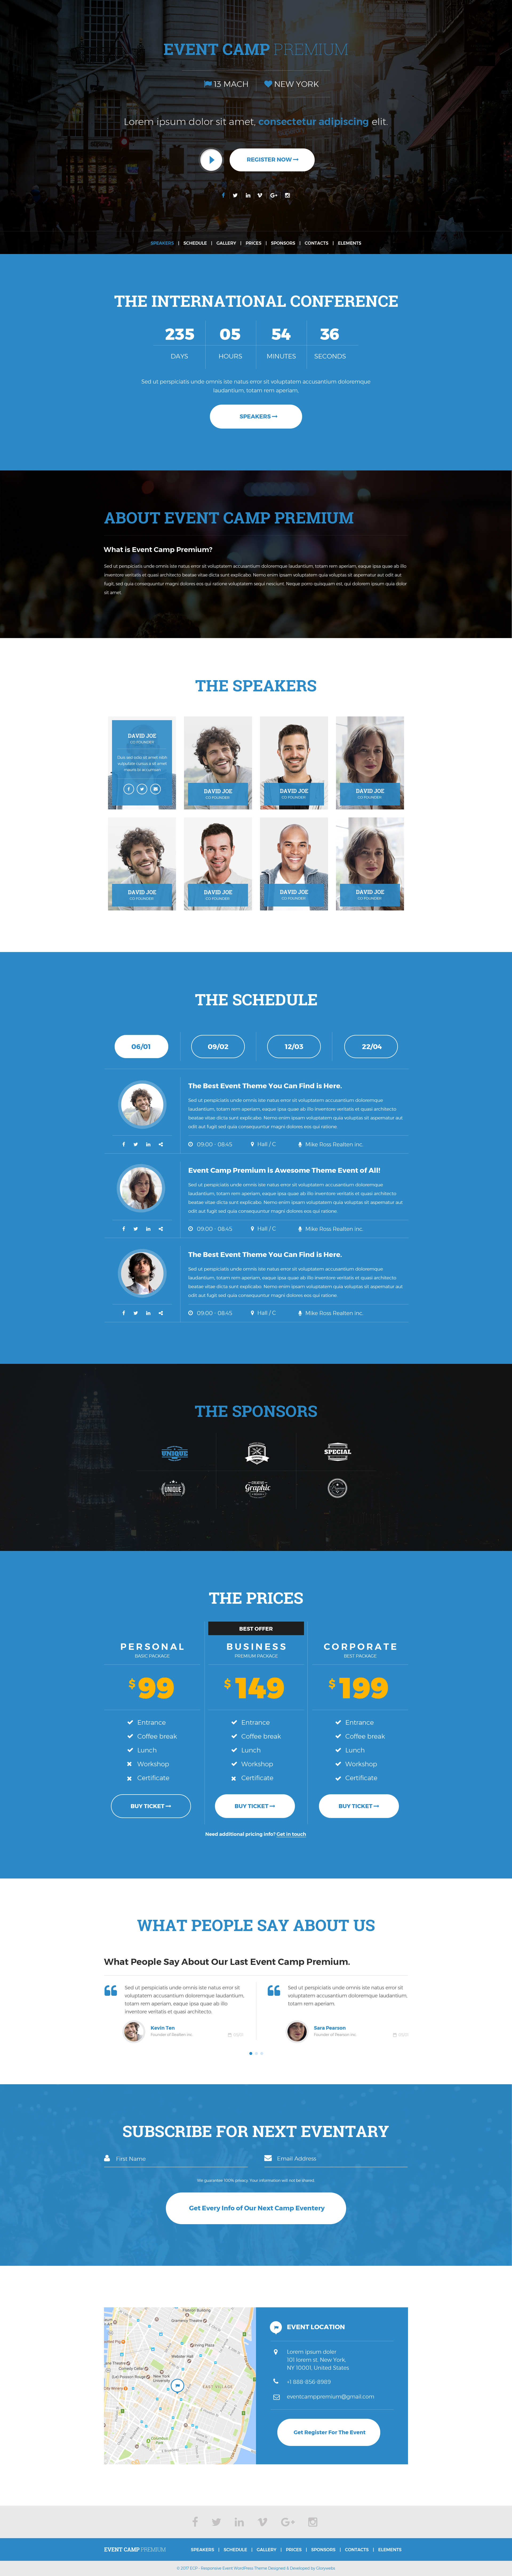 Event Camp - Premium Event Conference PSD Template